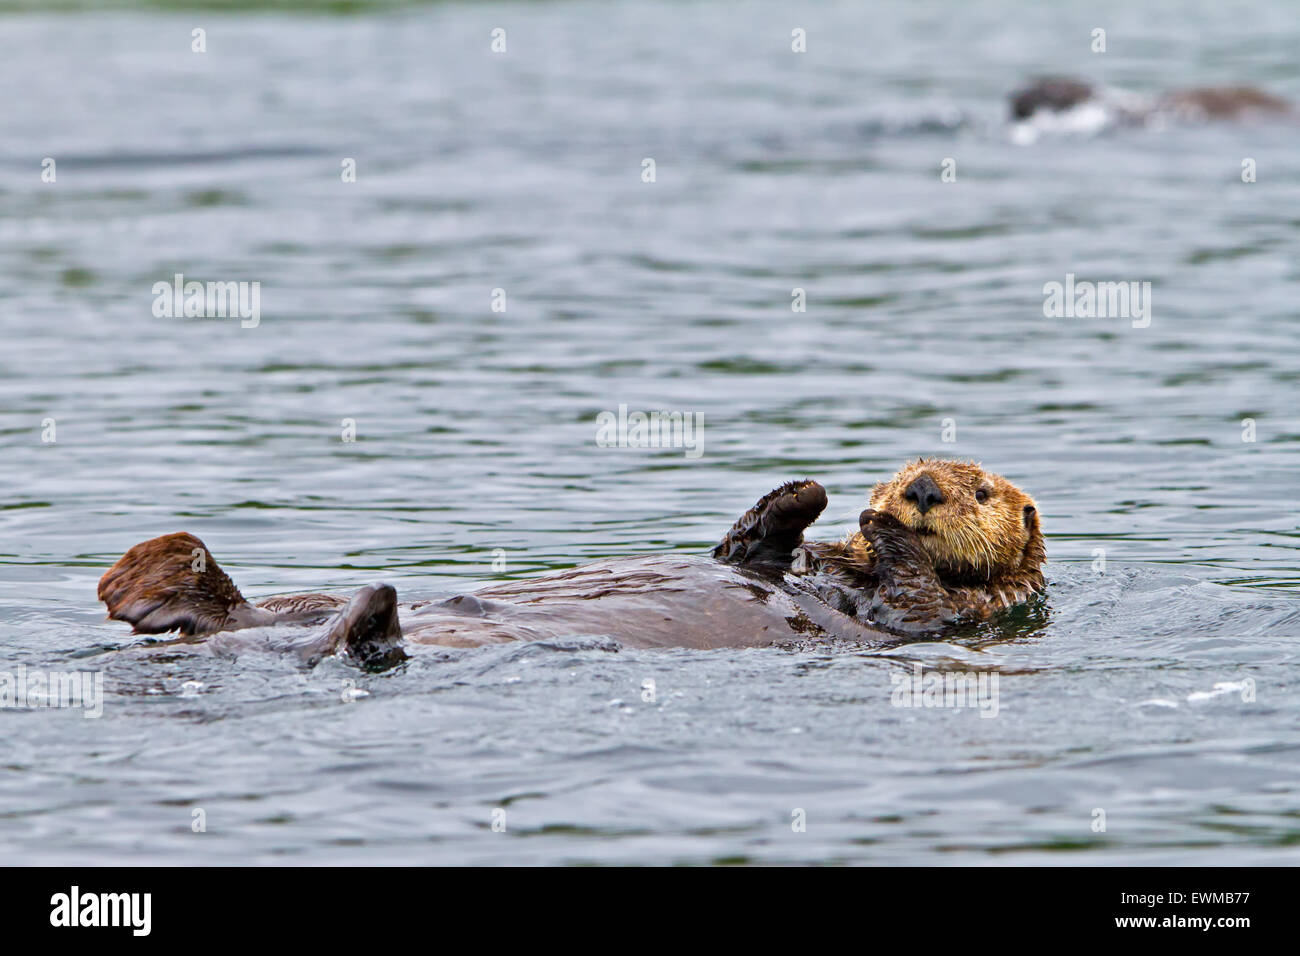 Sea otter, Enhydra lutris, belongs to the weasel family, photographed of the west coast of northern Vancouver Island, British Co Stock Photo